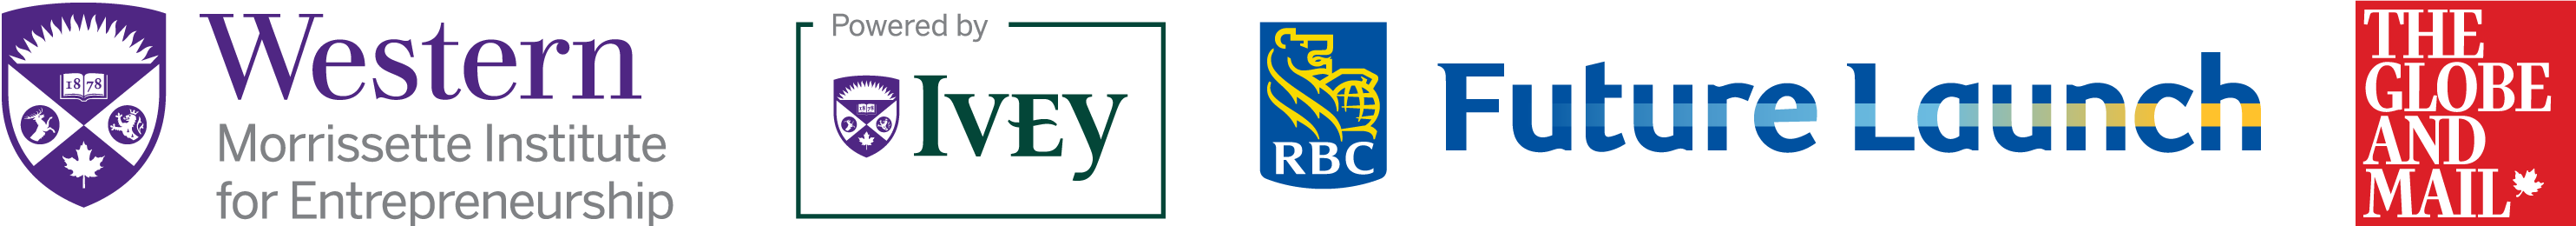 Header logo - Western's The Founder's Journey, RBC Future Launch, The Globe and Mail